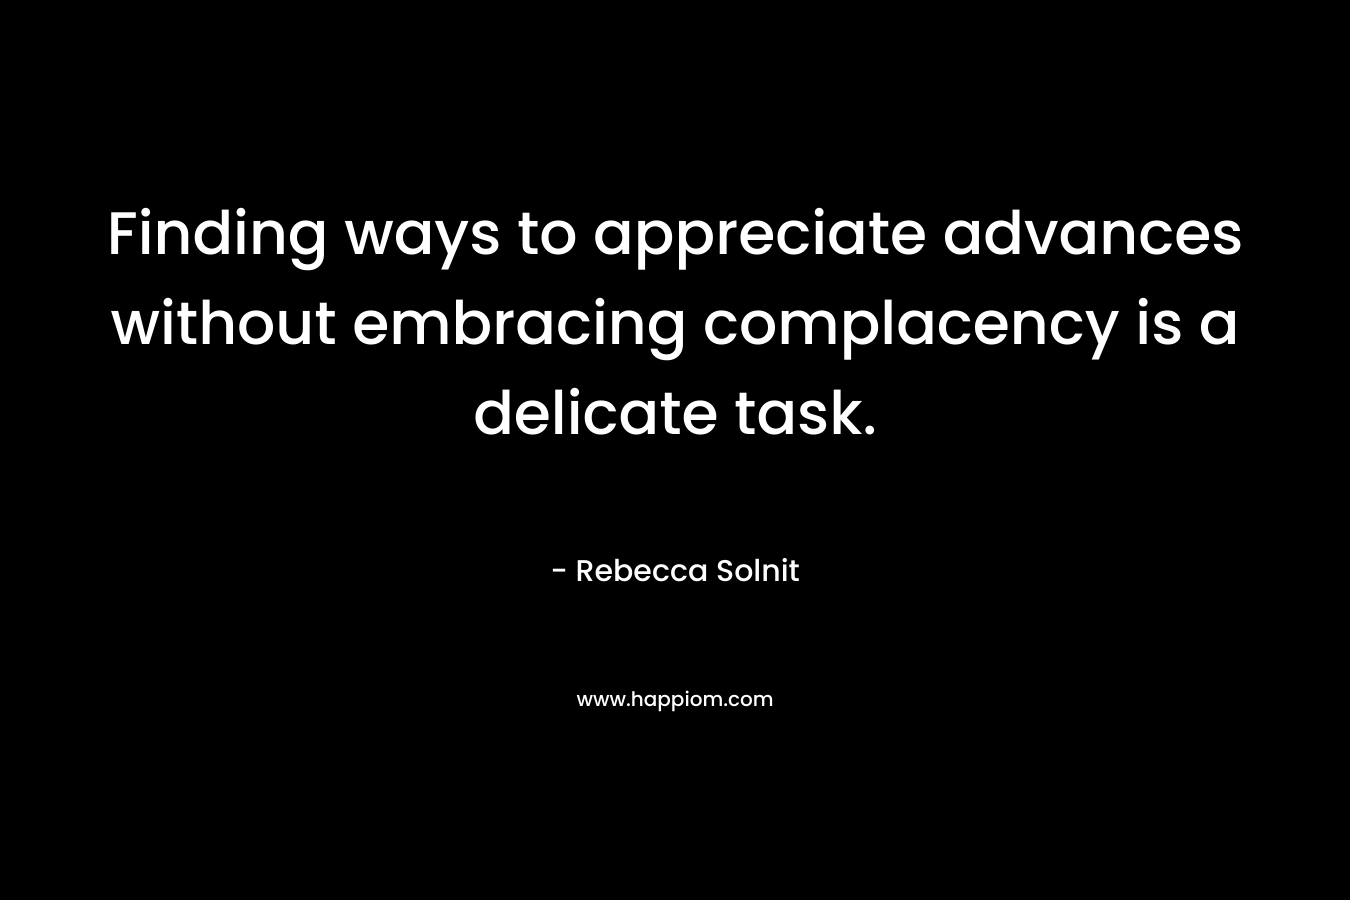 Finding ways to appreciate advances without embracing complacency is a delicate task.